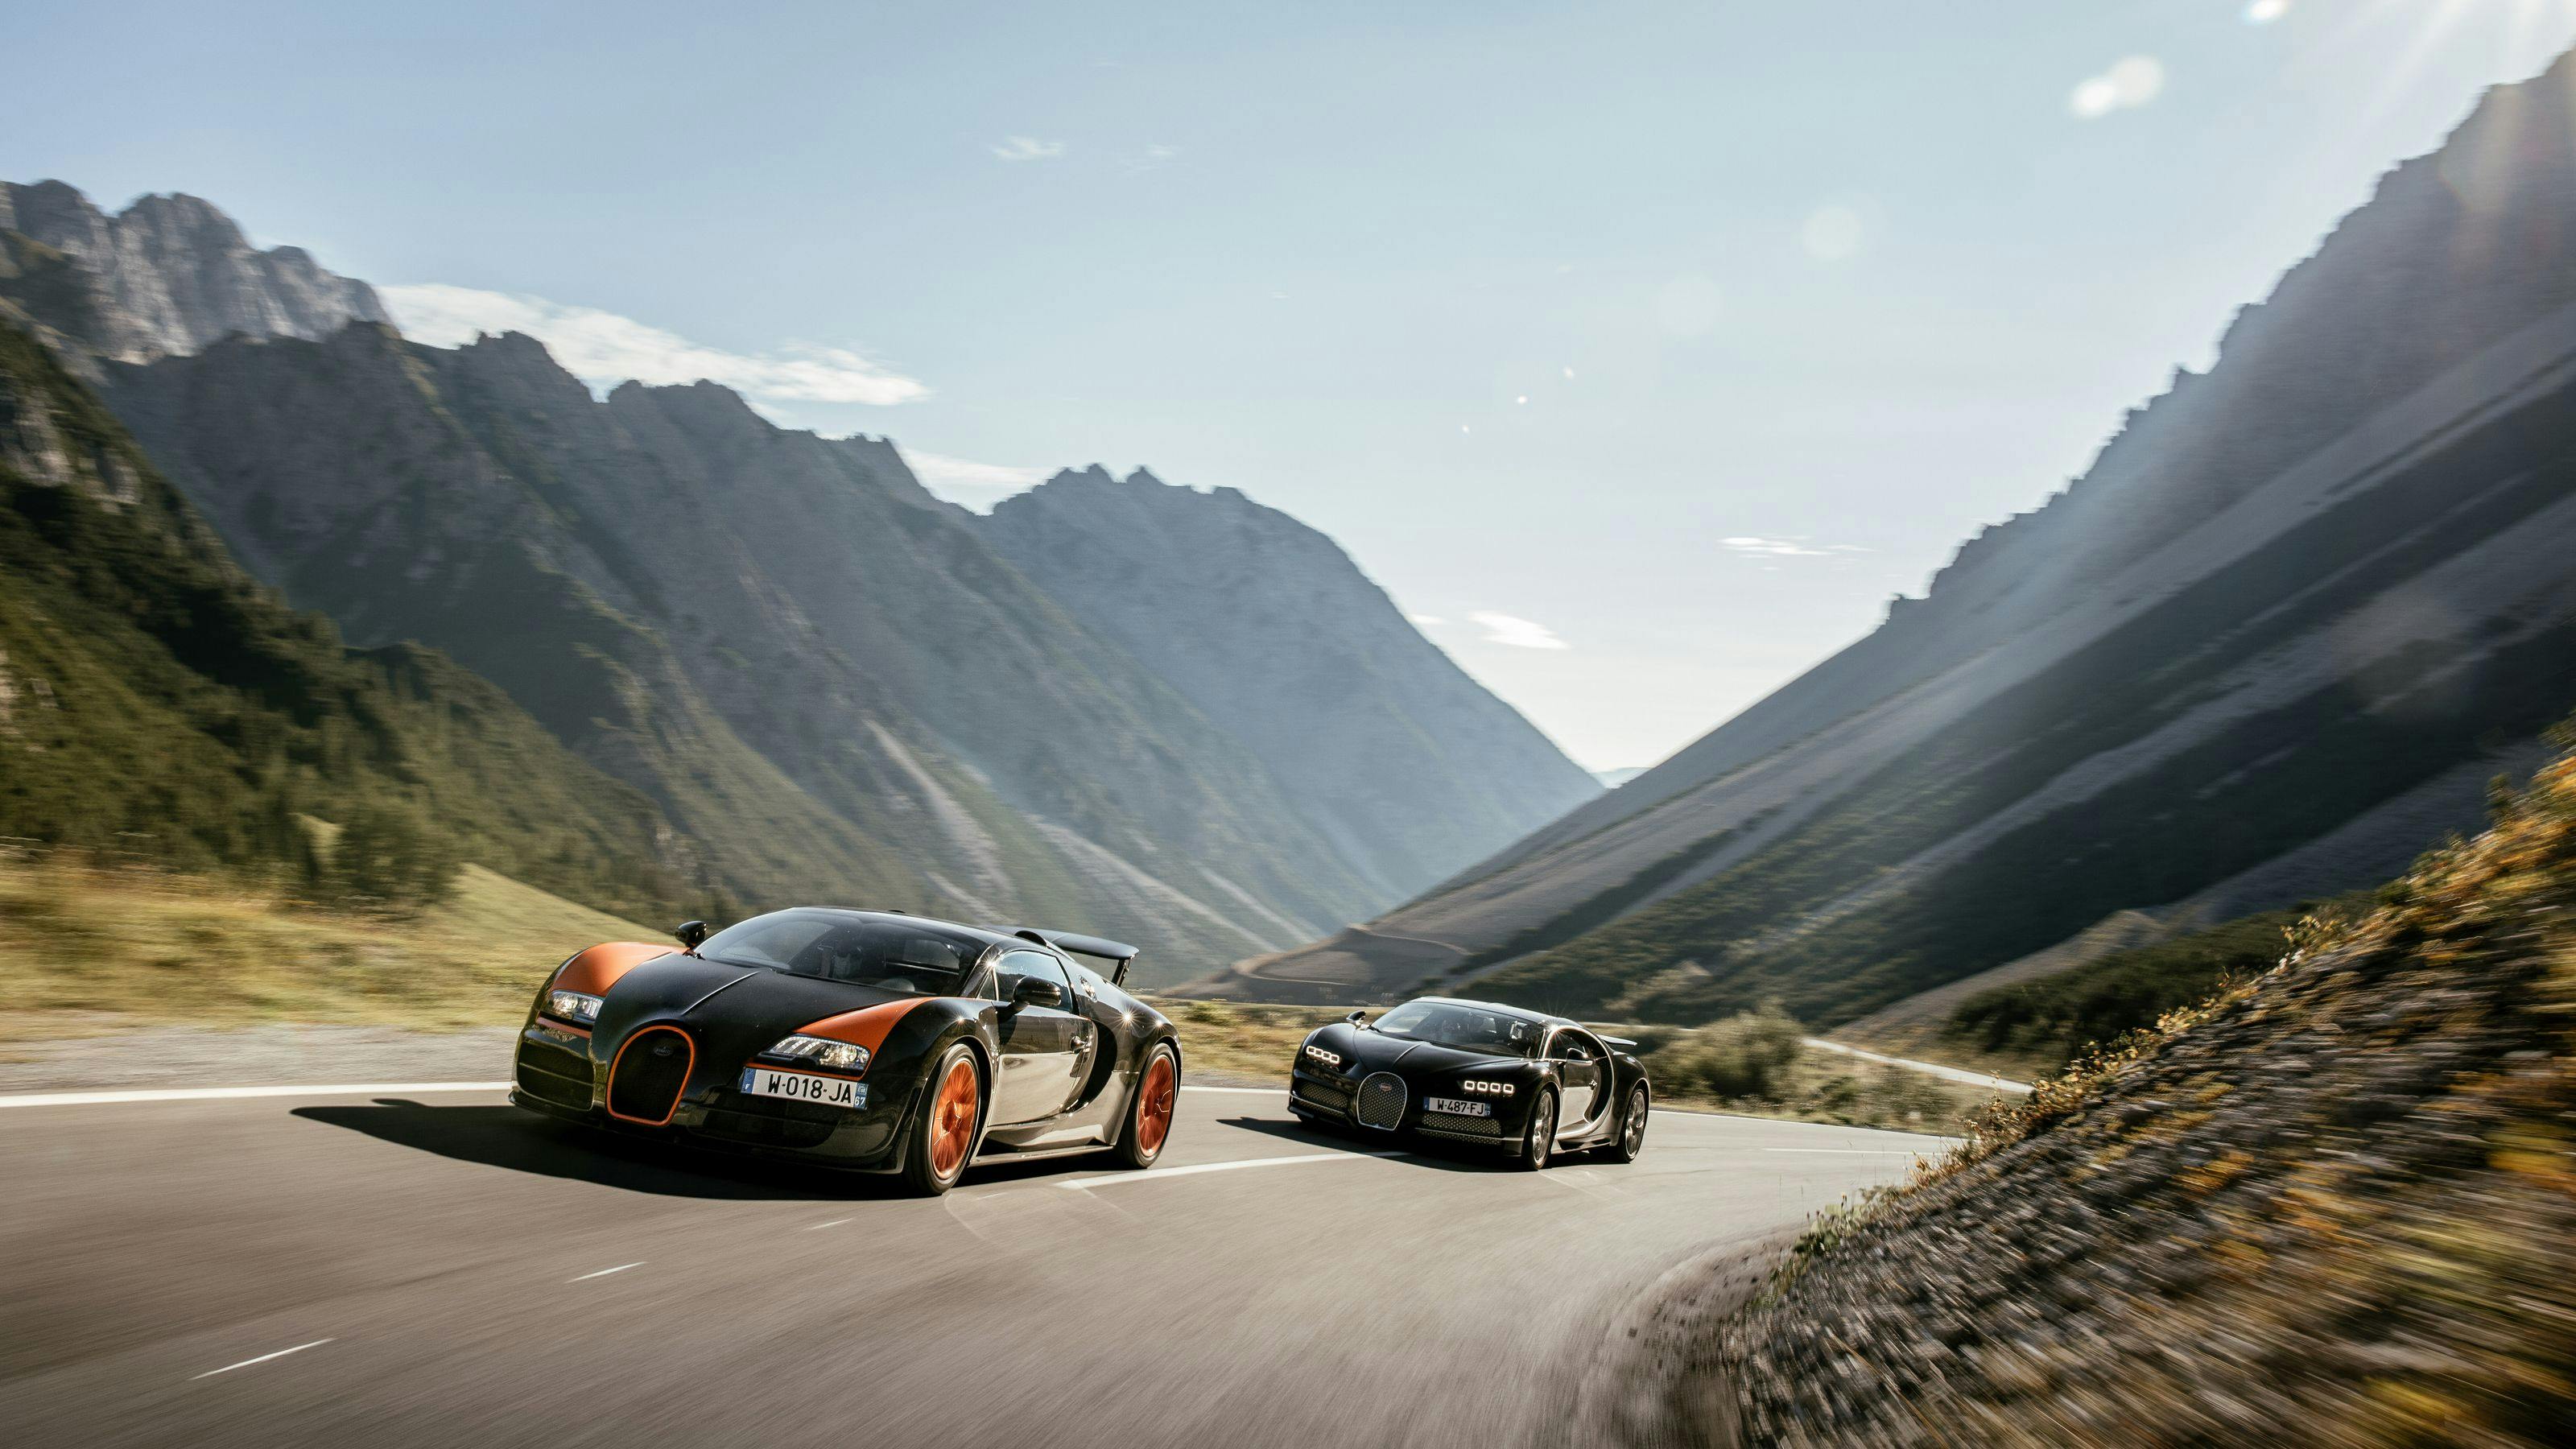 Bugatti Anniversary Tour – Road trip between the past and present